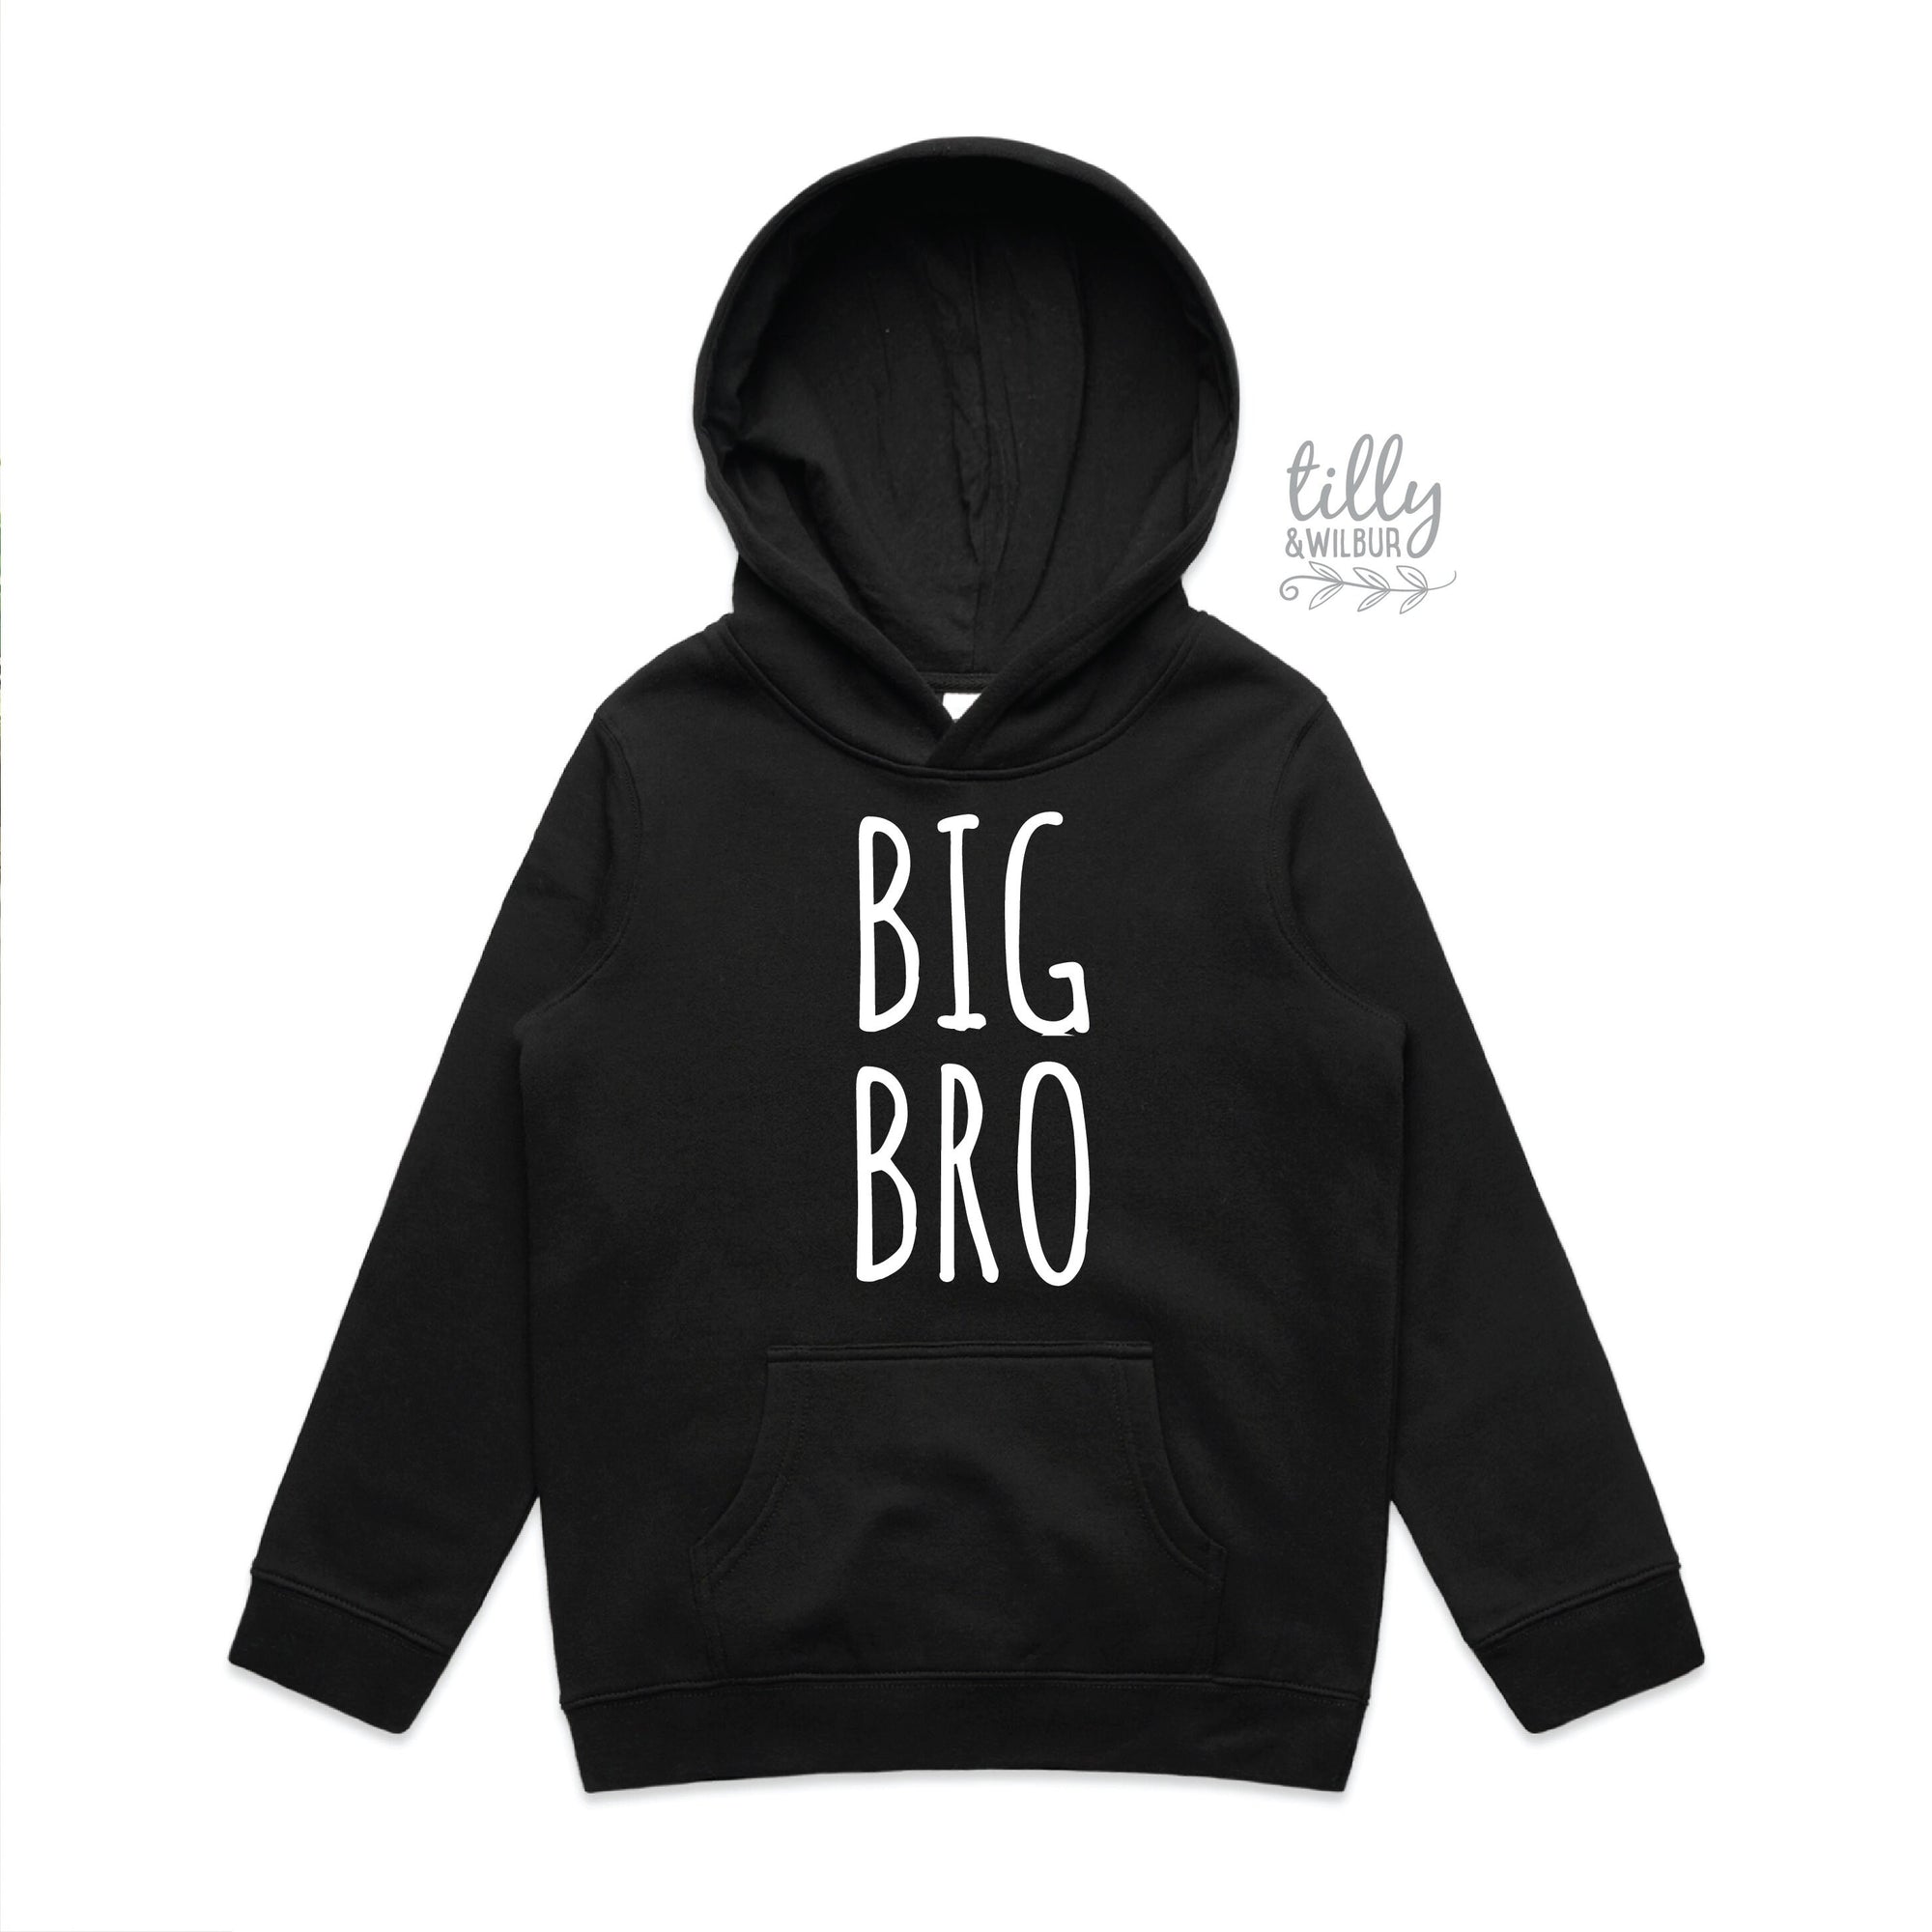 Big Brother Hoodie, Promoted To Big Brother Jumper, Big Brother Shirt, I'm Going To Be A Big Brother, Pregnancy Announcement, Big Bro Shirt